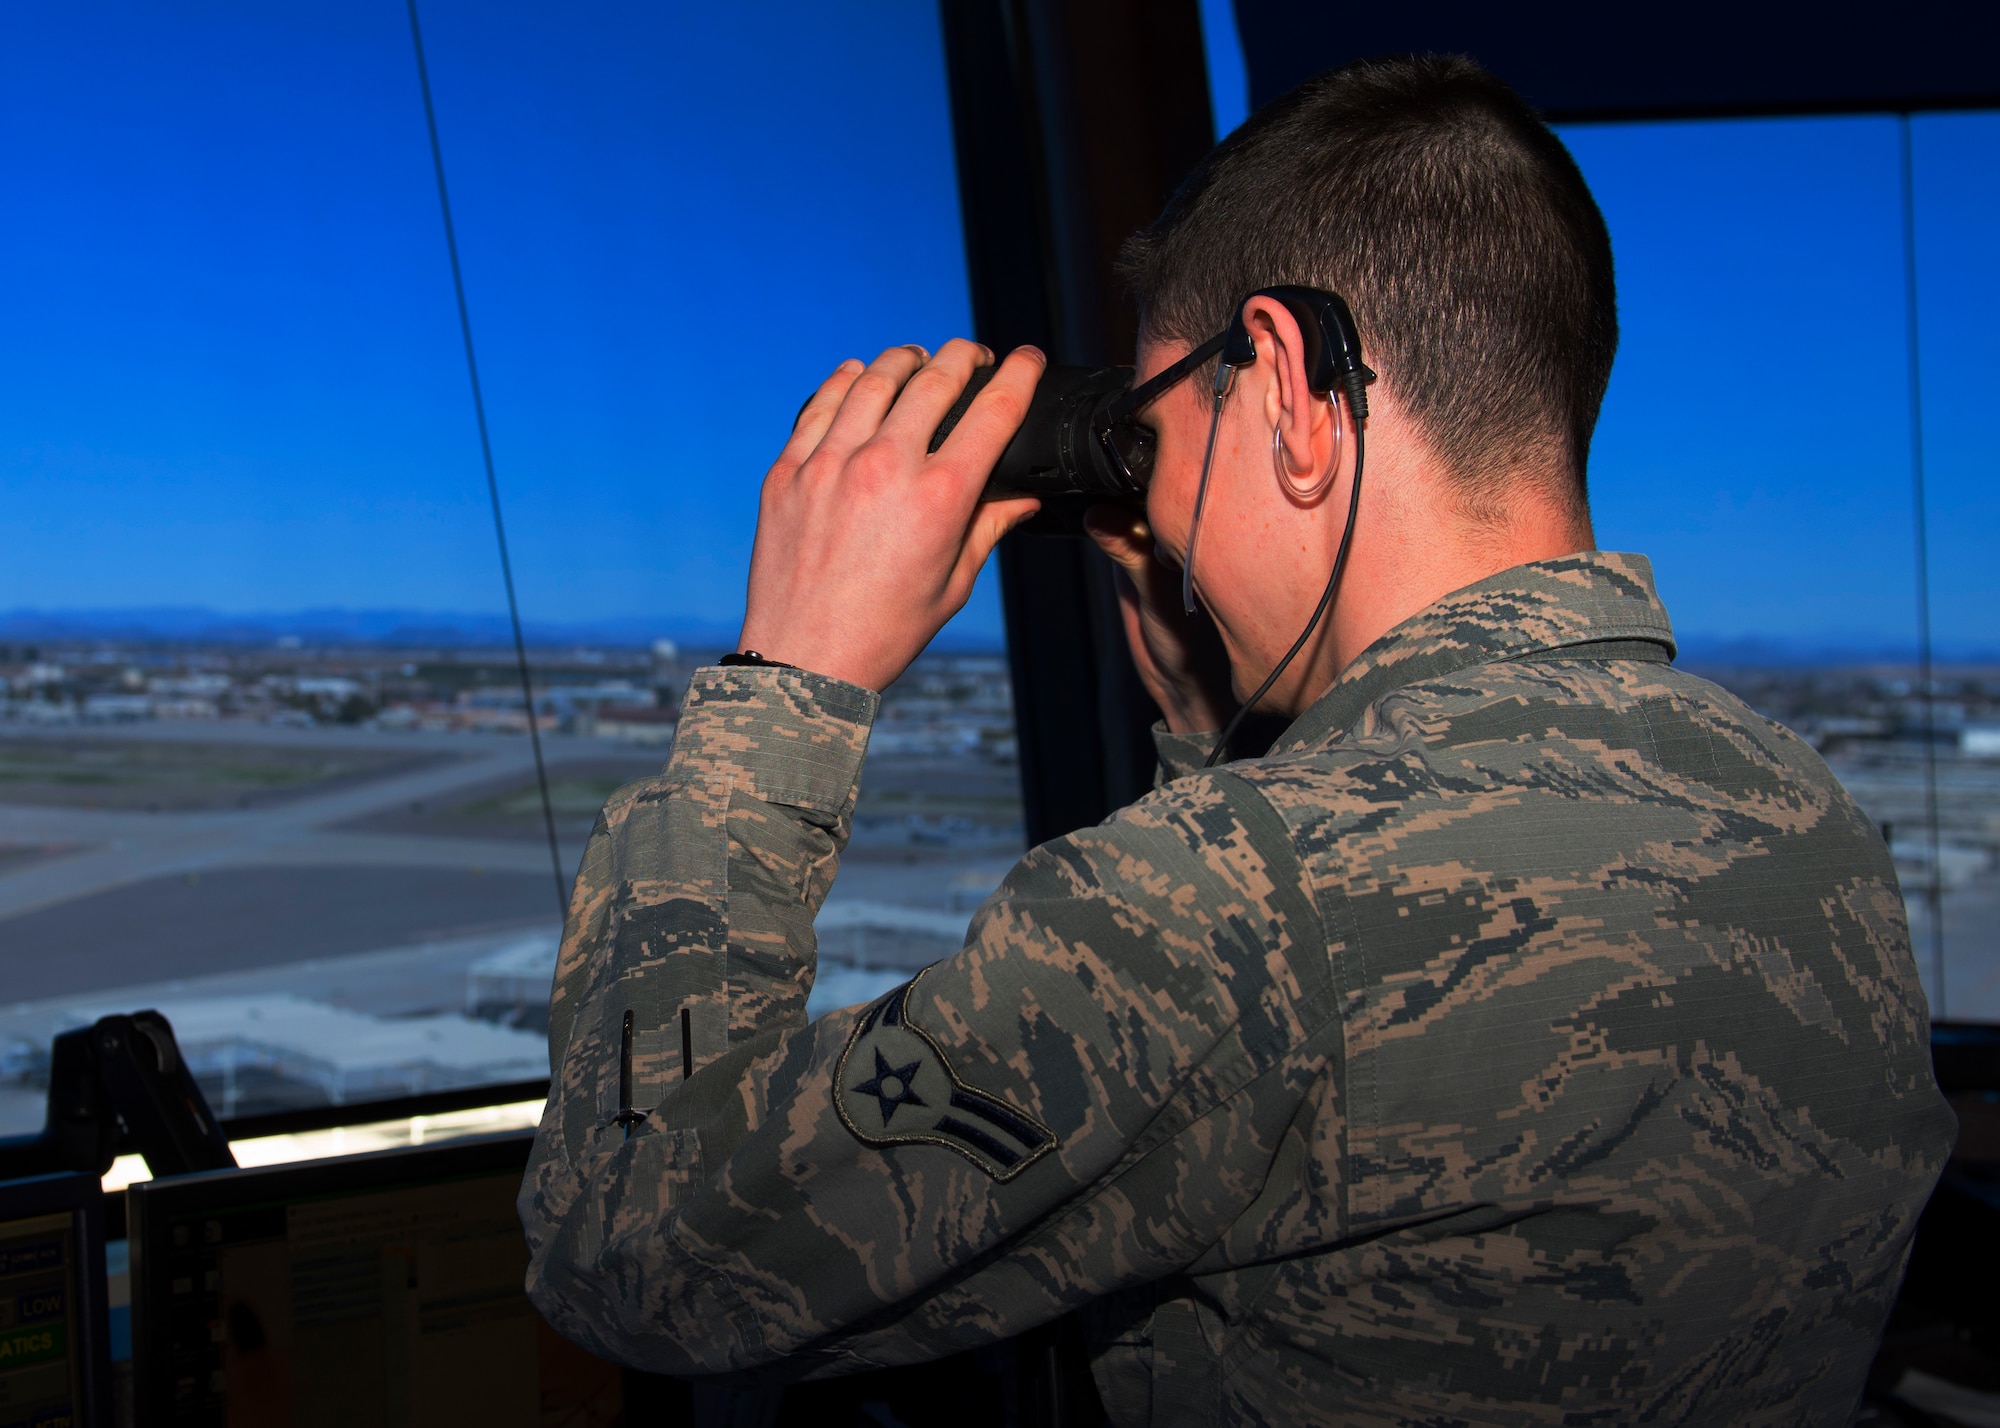 Airman 1st Class Morgan Ray, 56th Operations Support Squadron air traffic control apprentice, scans the flight line with binoculars at Luke Air Force Base, Ariz., Feb. 7, 2019.